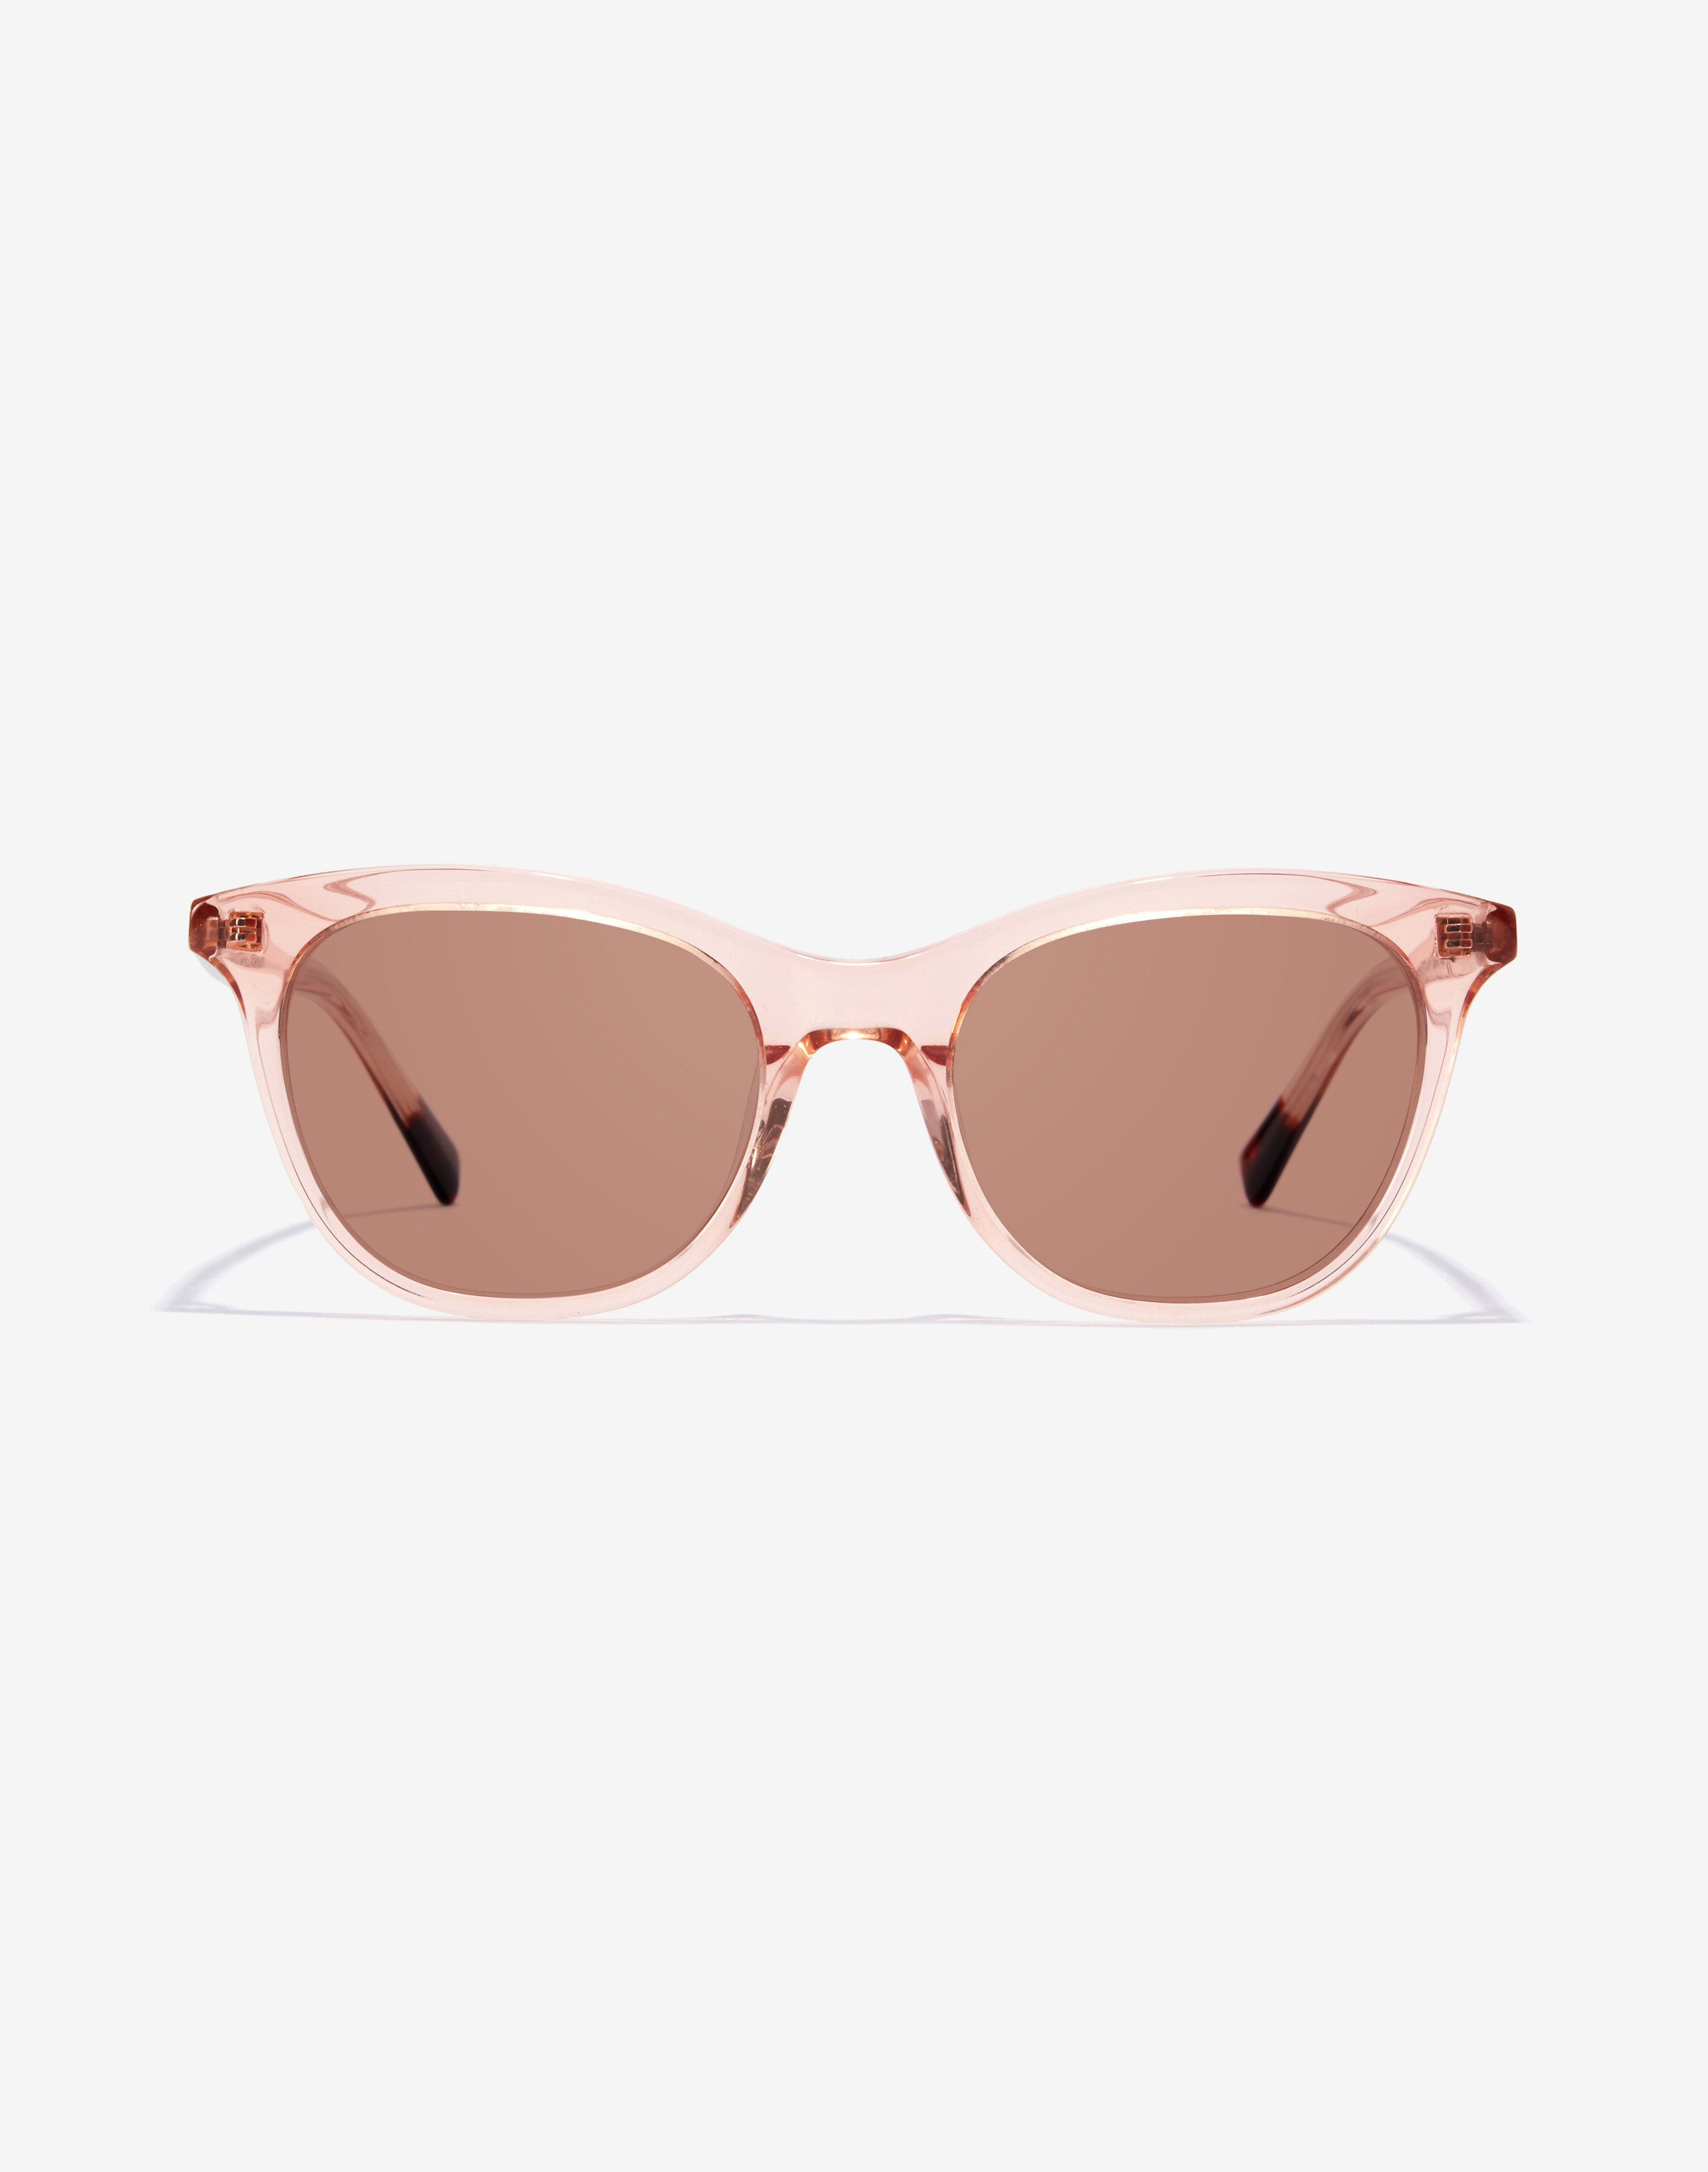 /on/demandware.static/-/Sites-Master-Catalog-Graduadas/default/dw7134672a/images/modal_colored/hawkers_eyewear-champagne-domaine-320088-brown.jpg